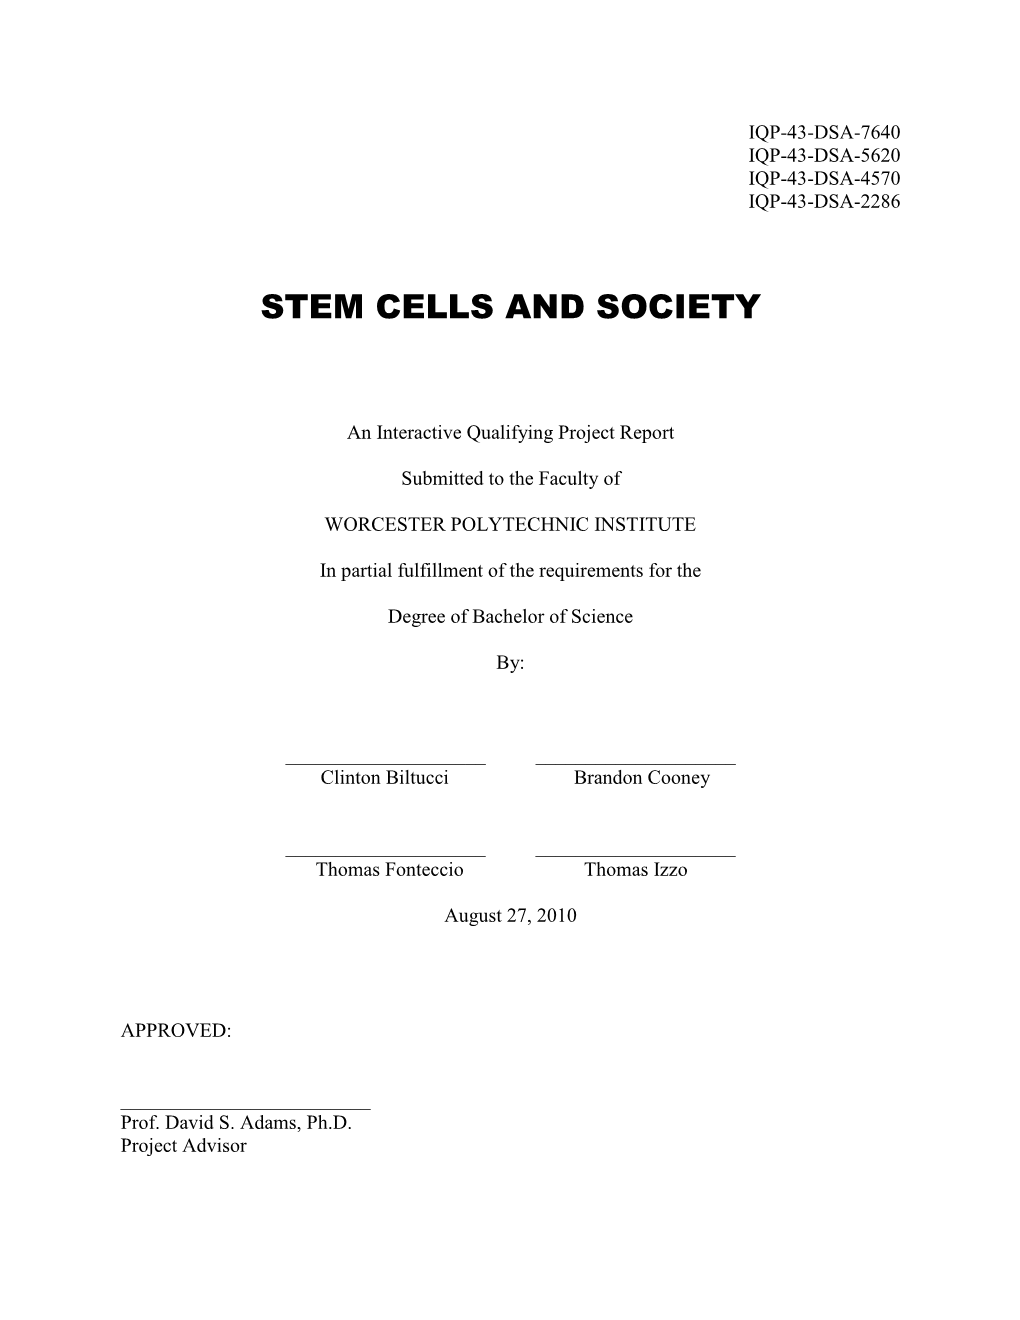 Stem Cells and Society